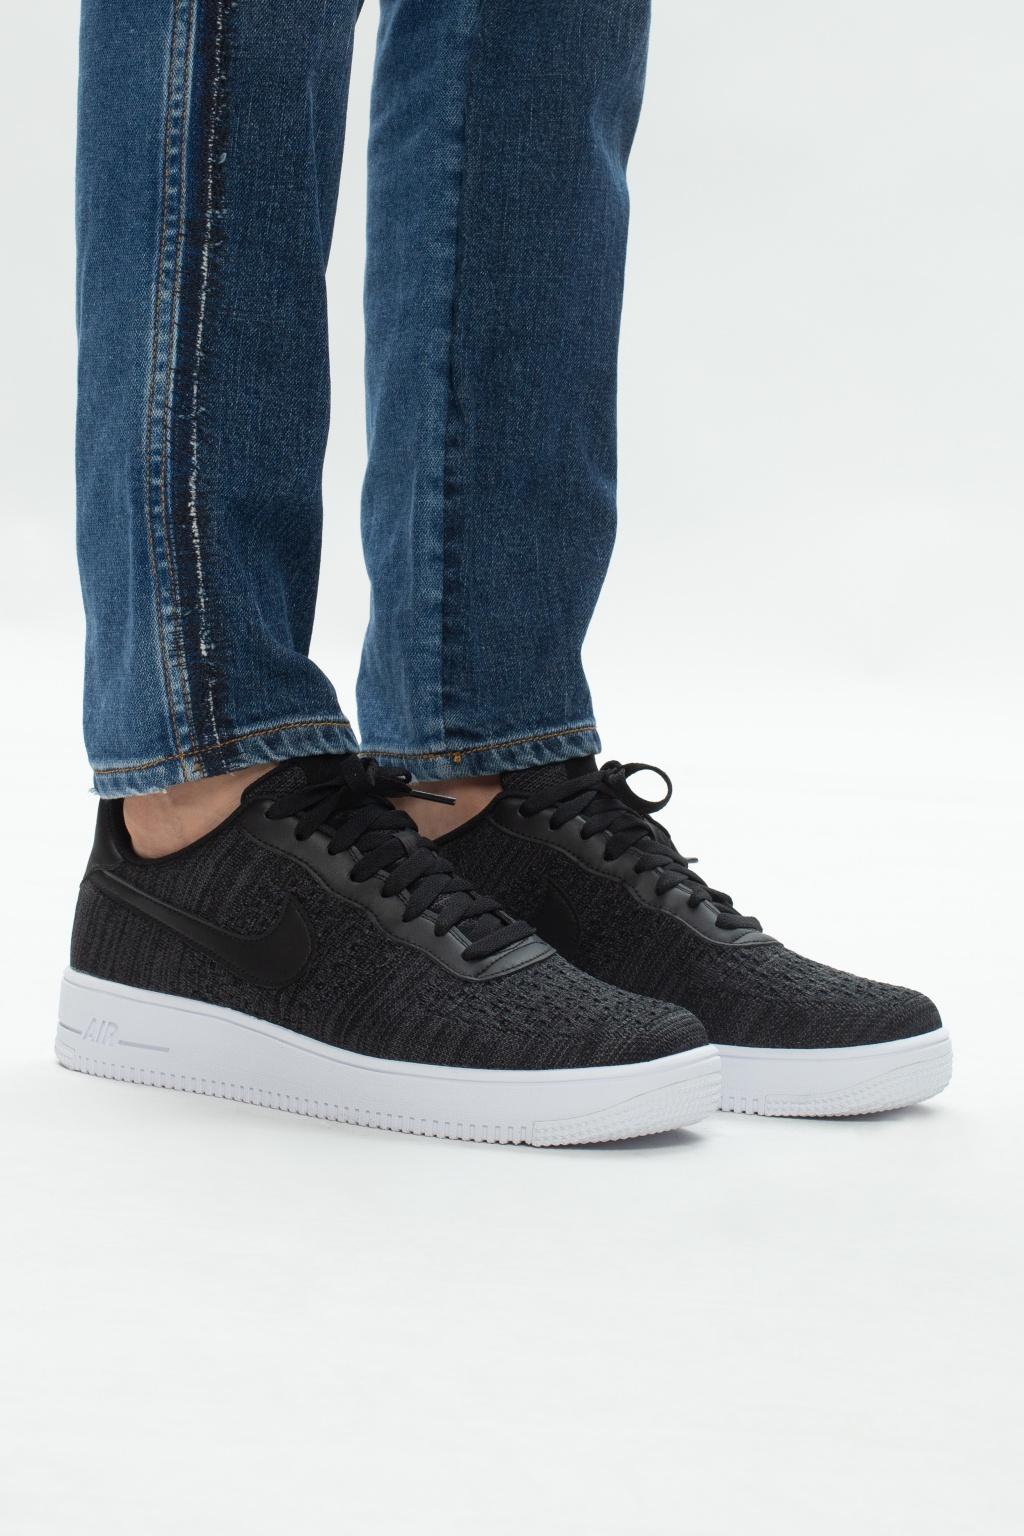 Nike Synthetic Air Force 1 Flyknit 2.0 in Black,White,Anthracite ...